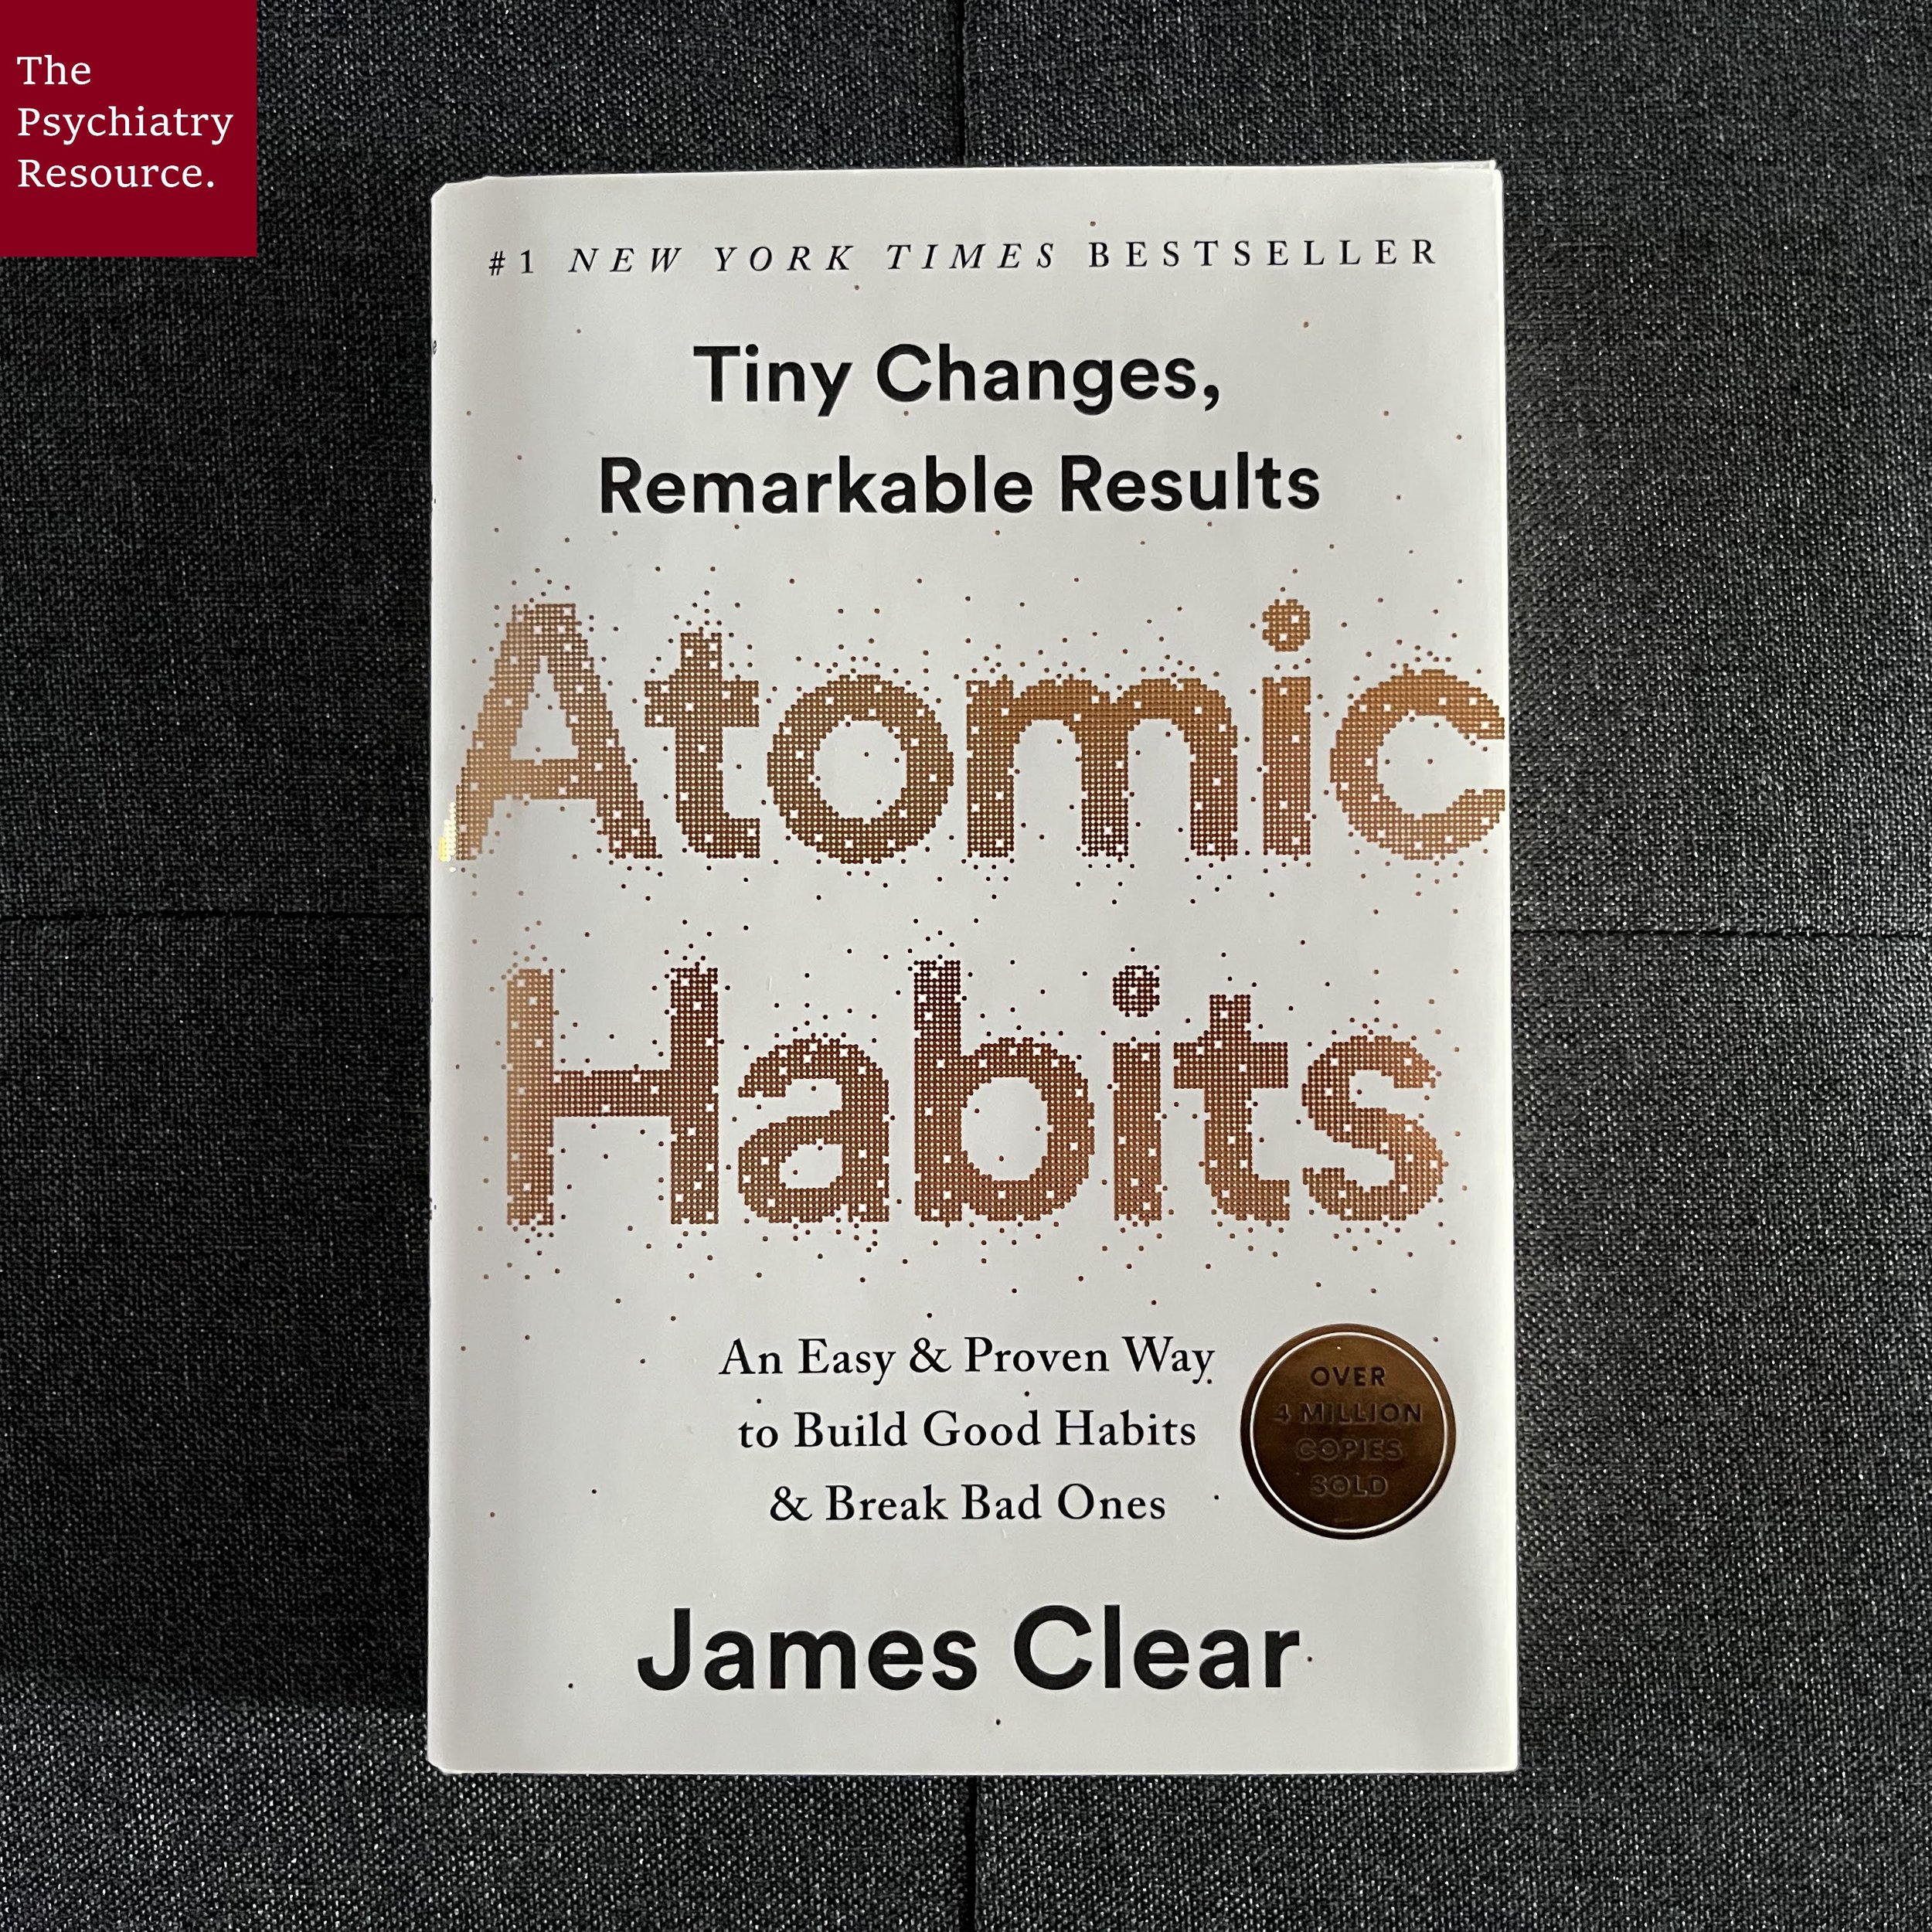 Book Summary - Atomic Habits (James Clear)